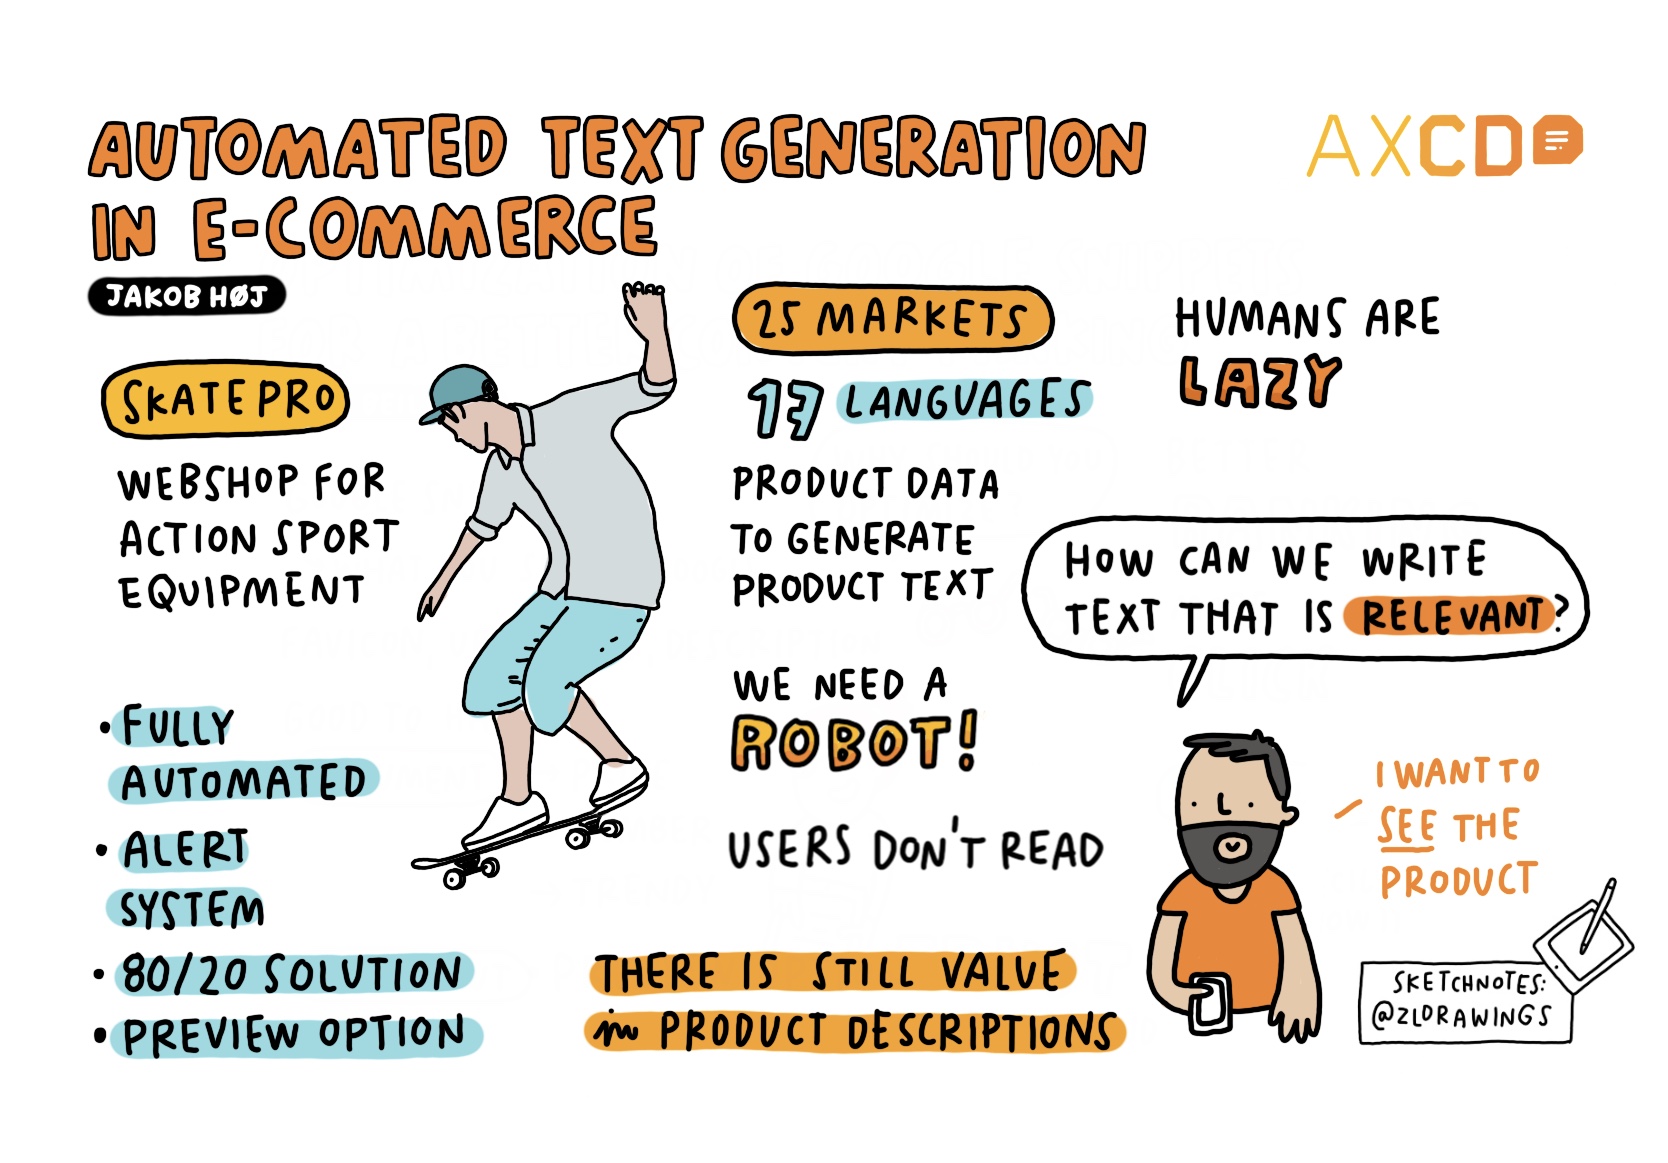 Sketchnote of automated text generation in ecommerce - Jakob Biegel's AXCD talk